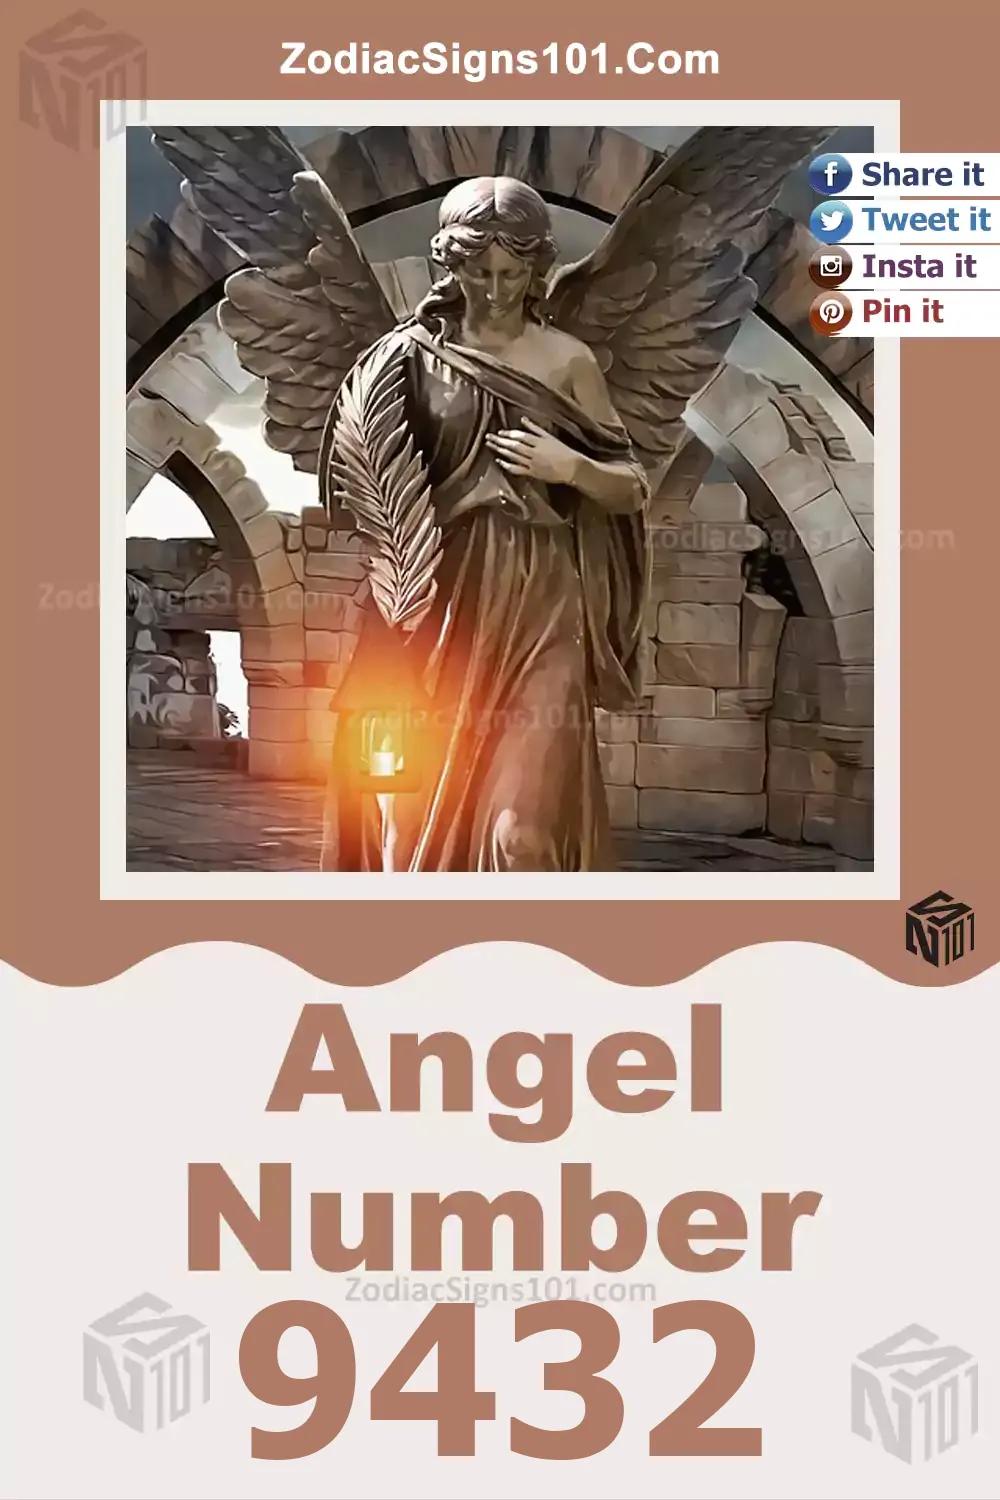 9432 Angel Number Meaning